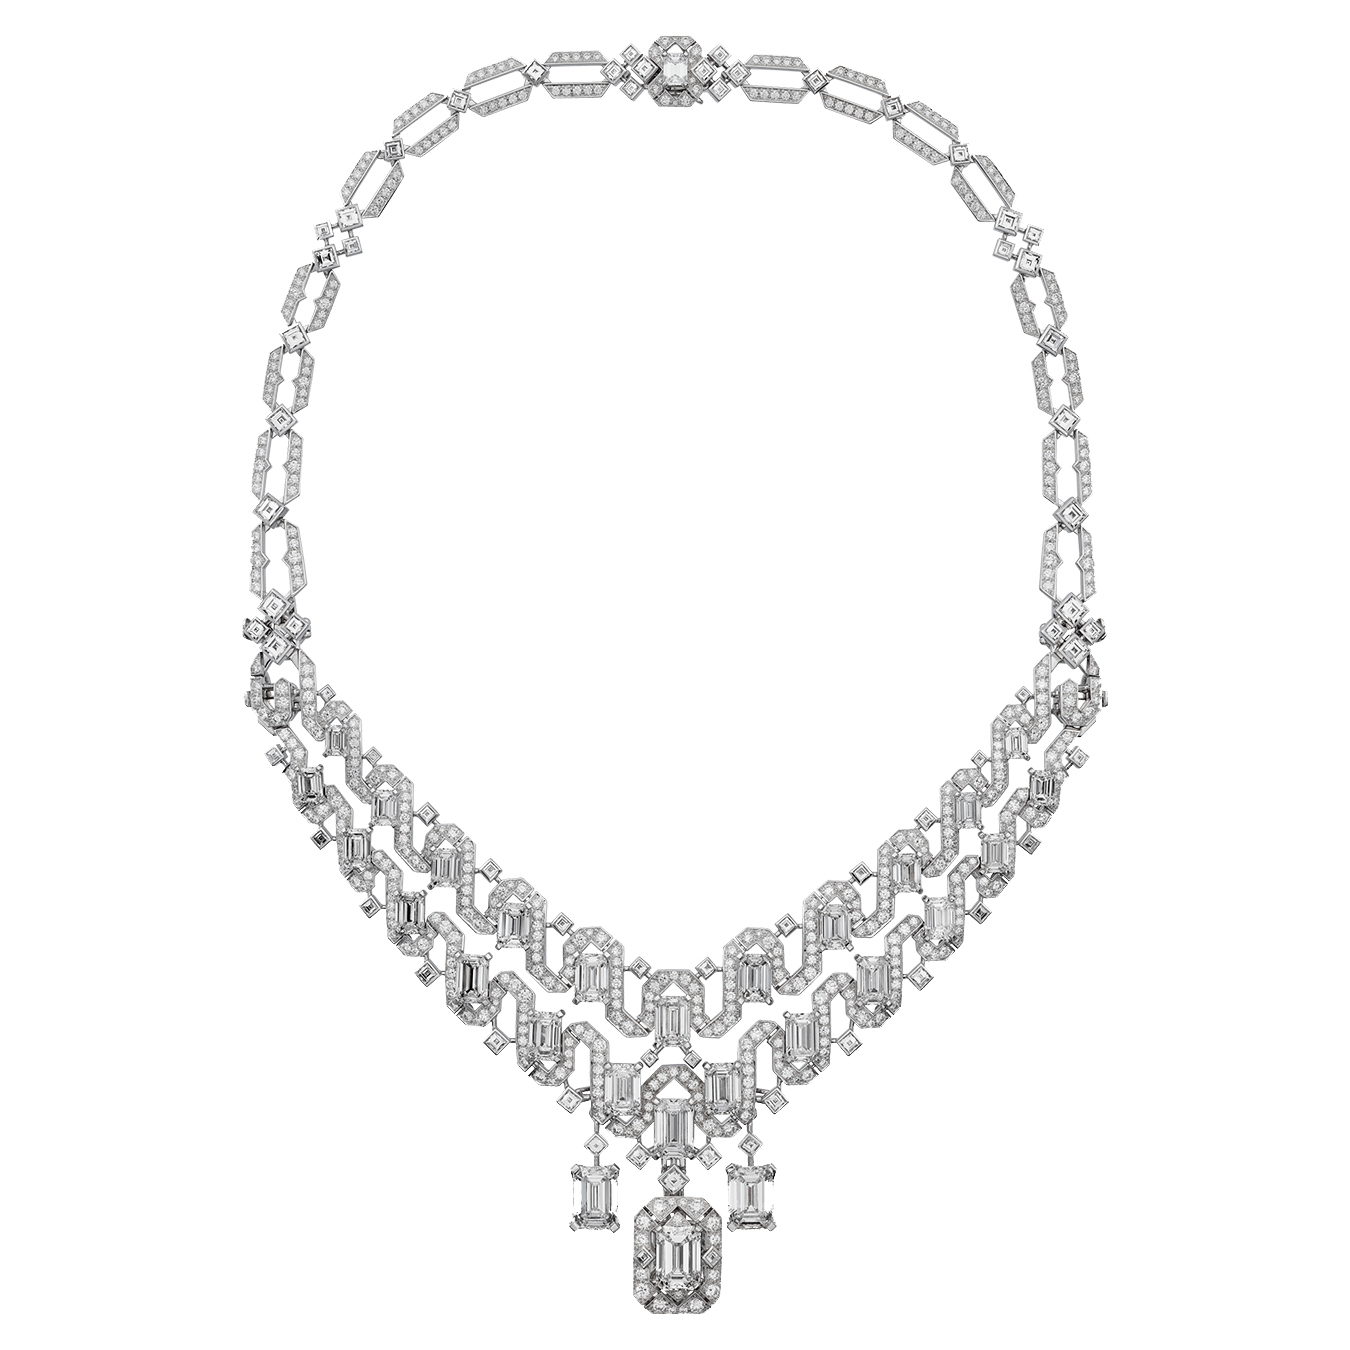 High jewelry platinum emerald cut diamond necklace that converts into emerald cut diamond earrings & a ring by Cartier